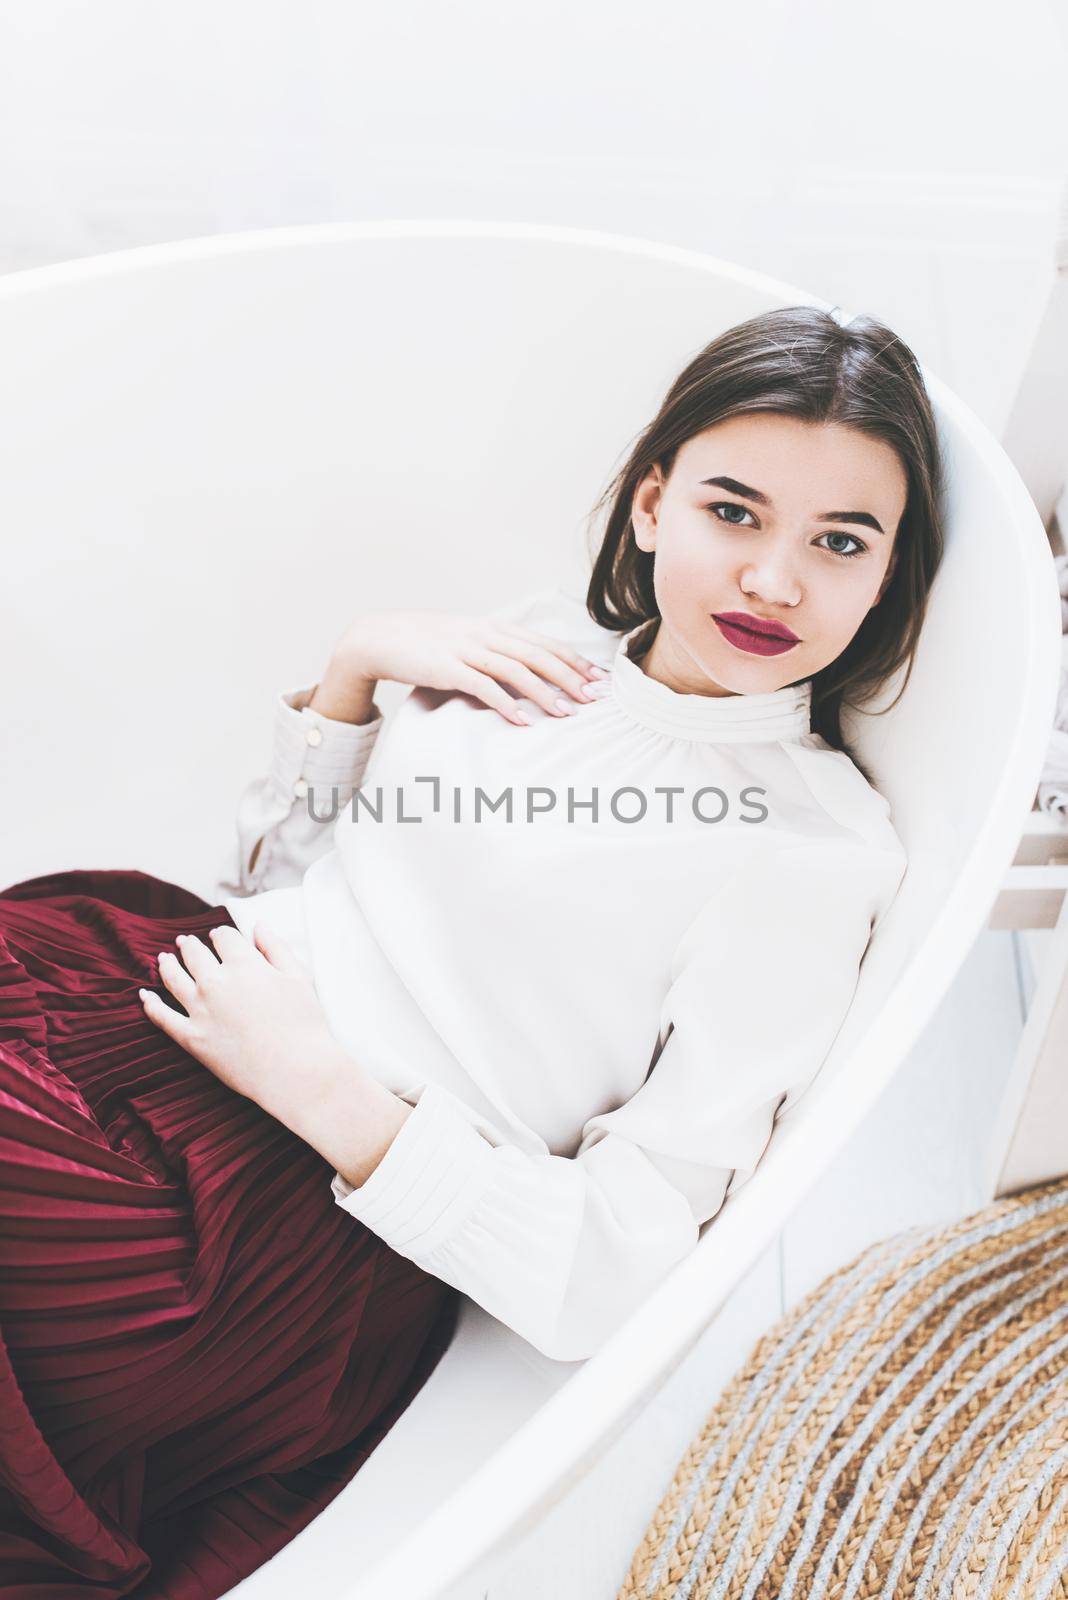 Portrait of fashionable women in red skirt and white blouse posing in a bath by Ashtray25